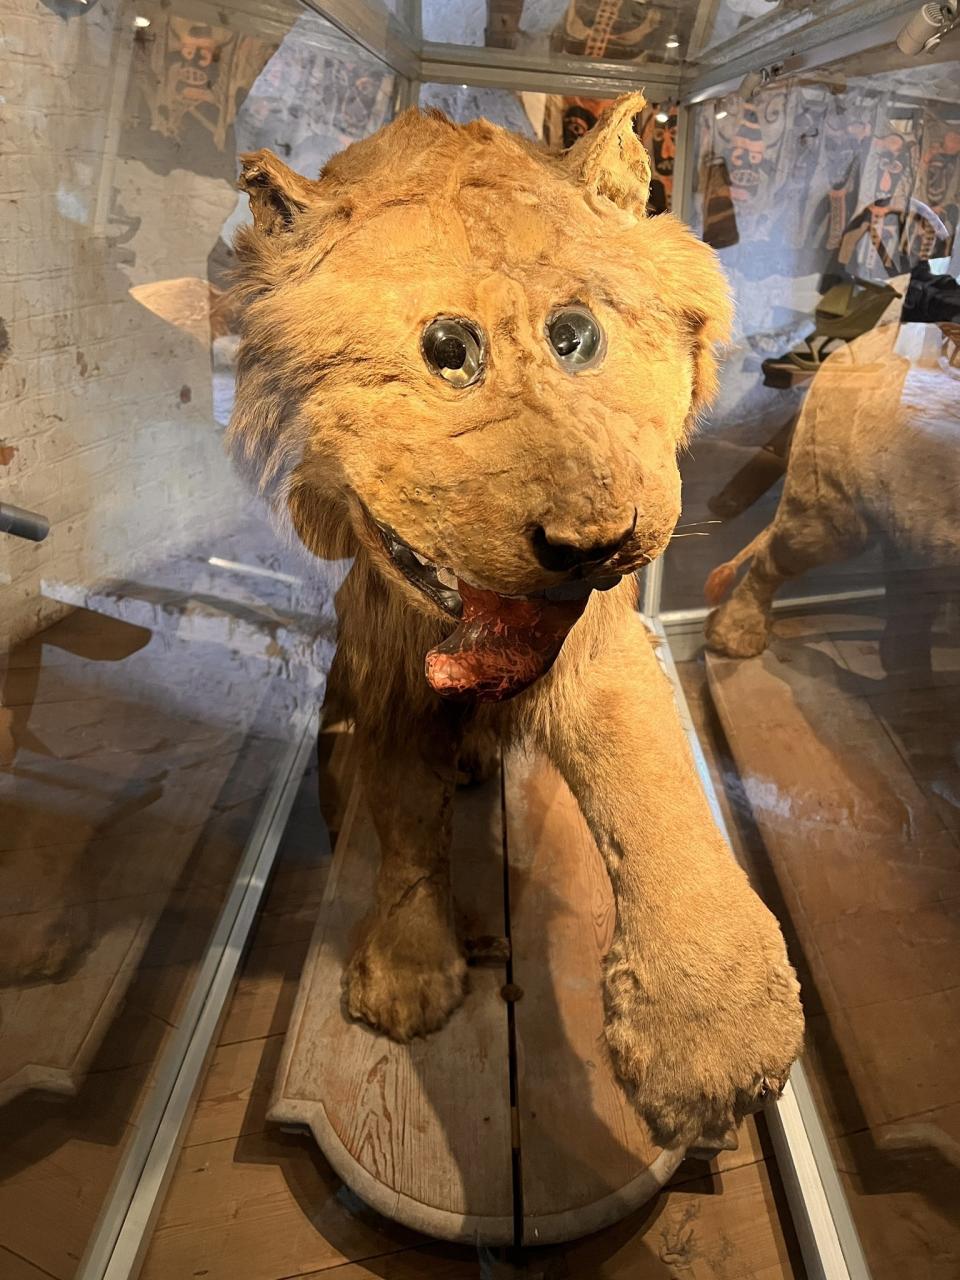 A taxidermy "lion" that looks nothing like a lion, with small ears, its tongue out, glass eyes very close together, and a raised paw